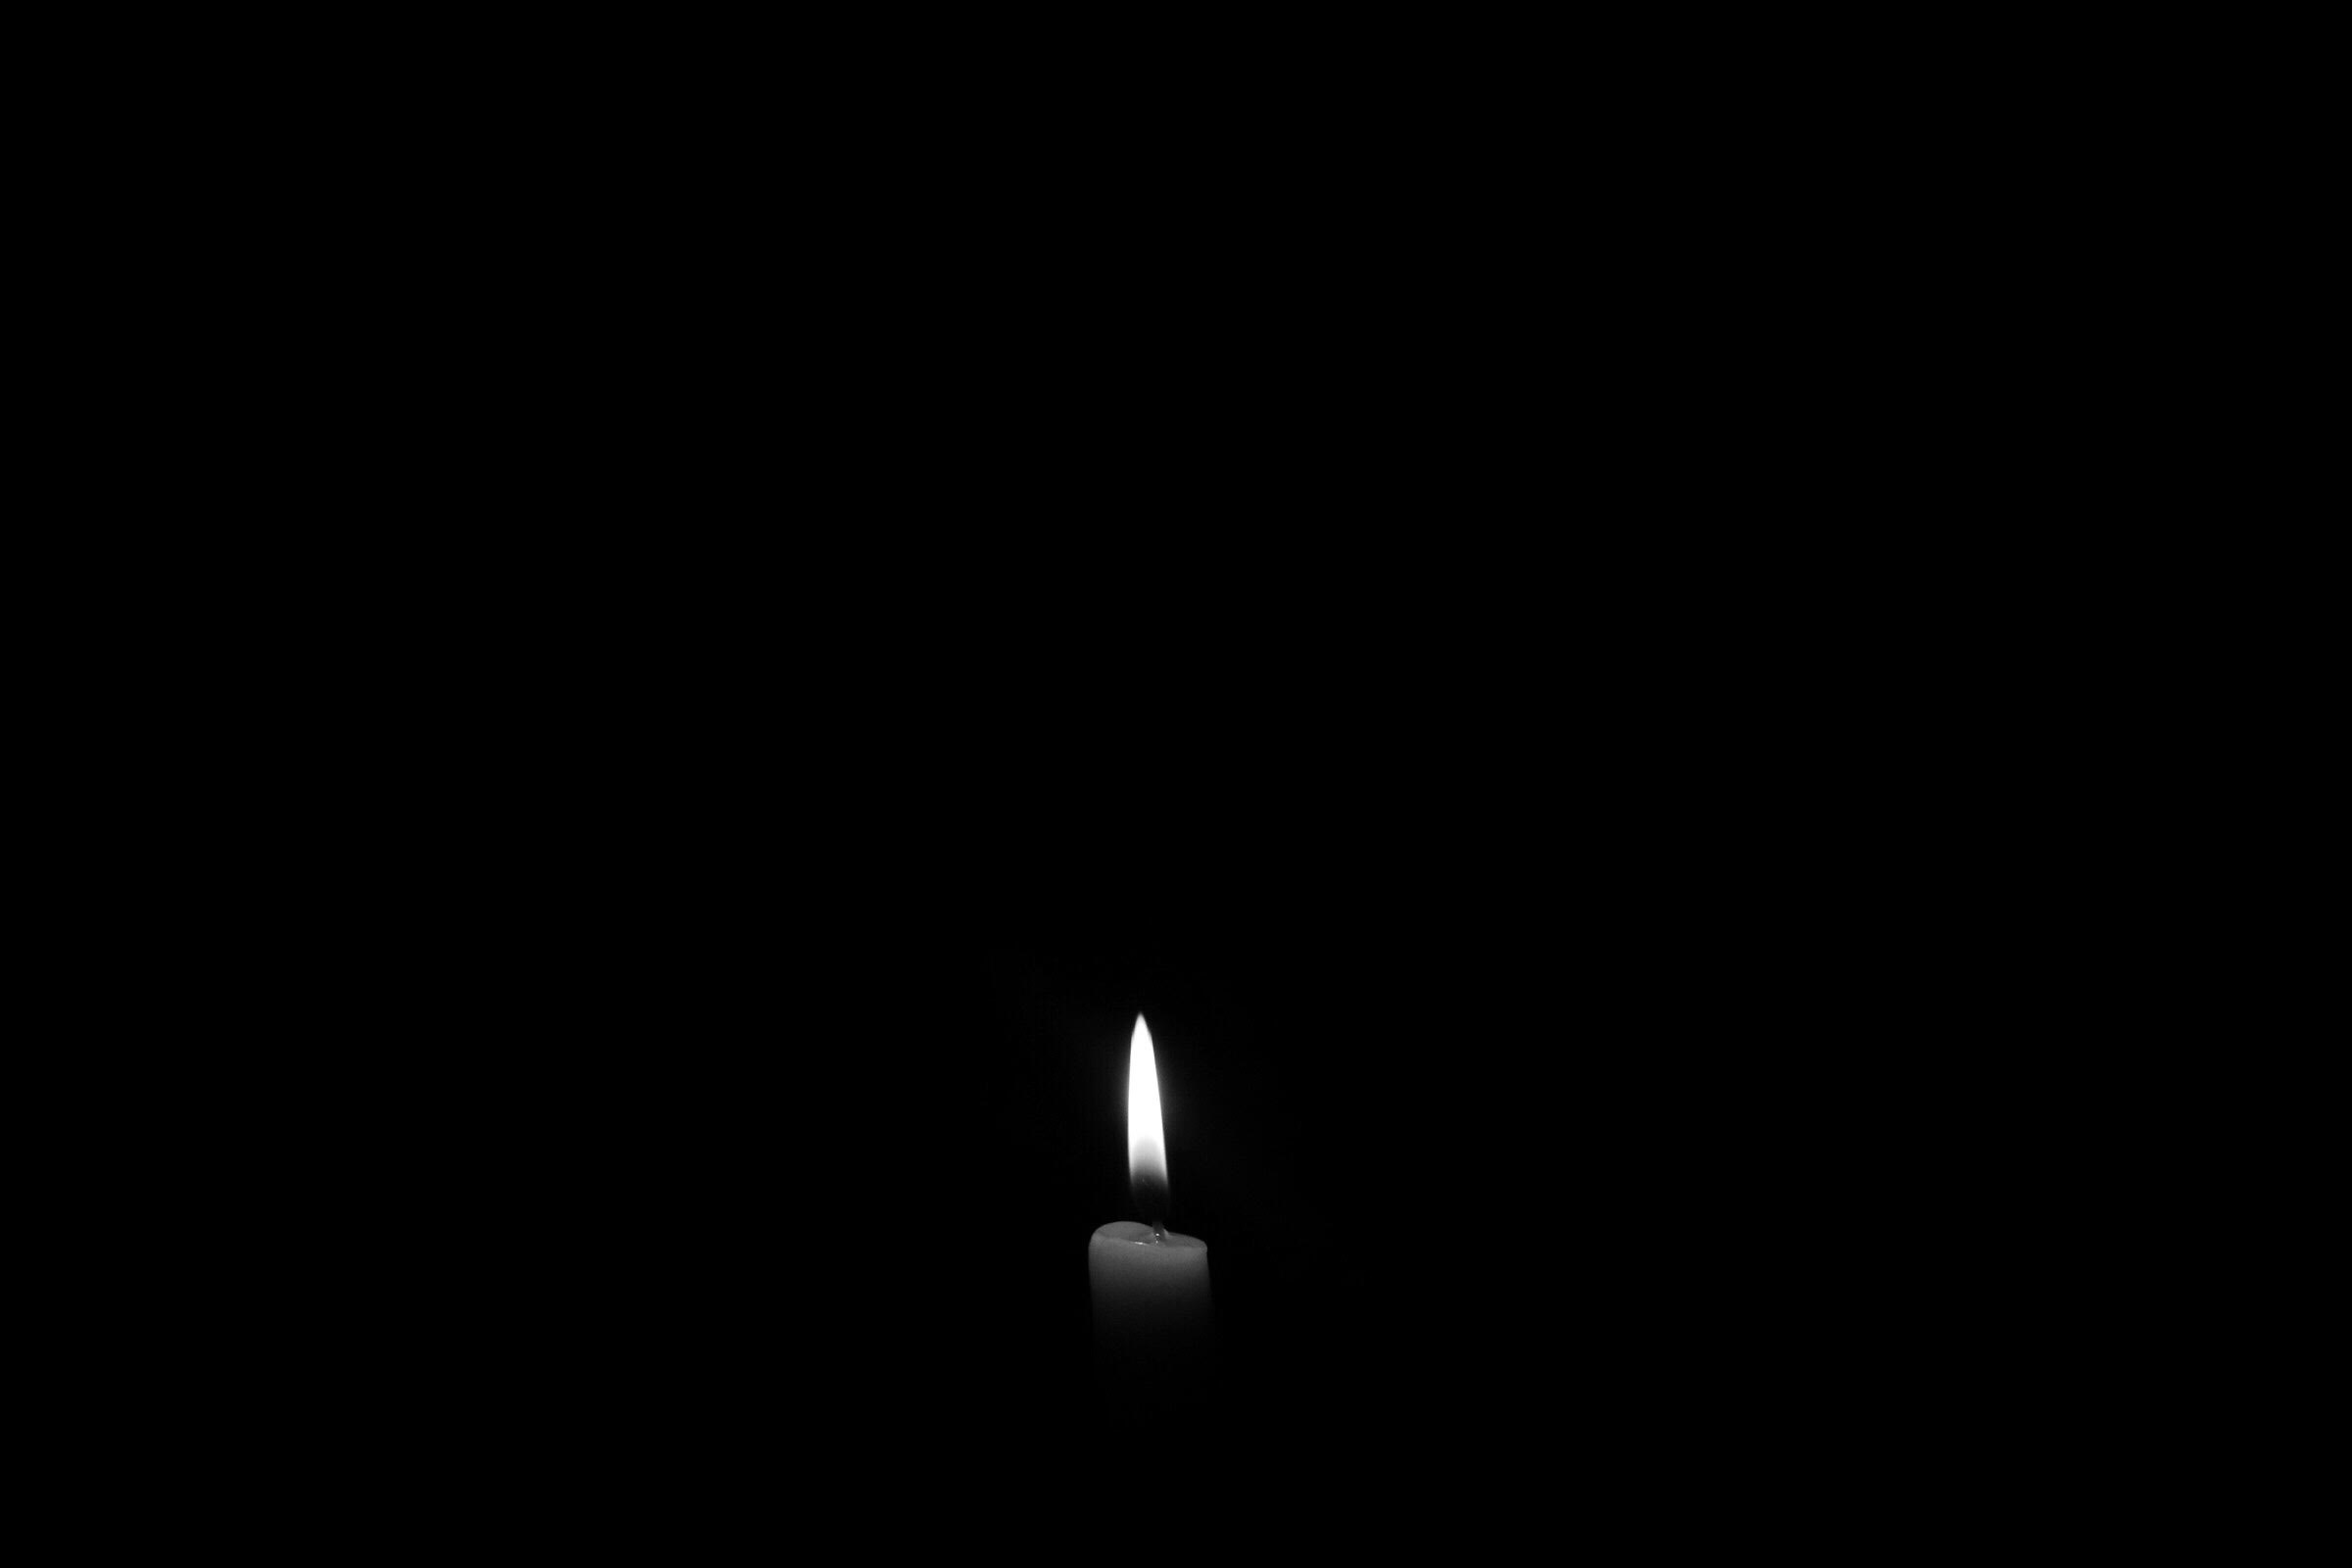 A lonely candle in the darkness